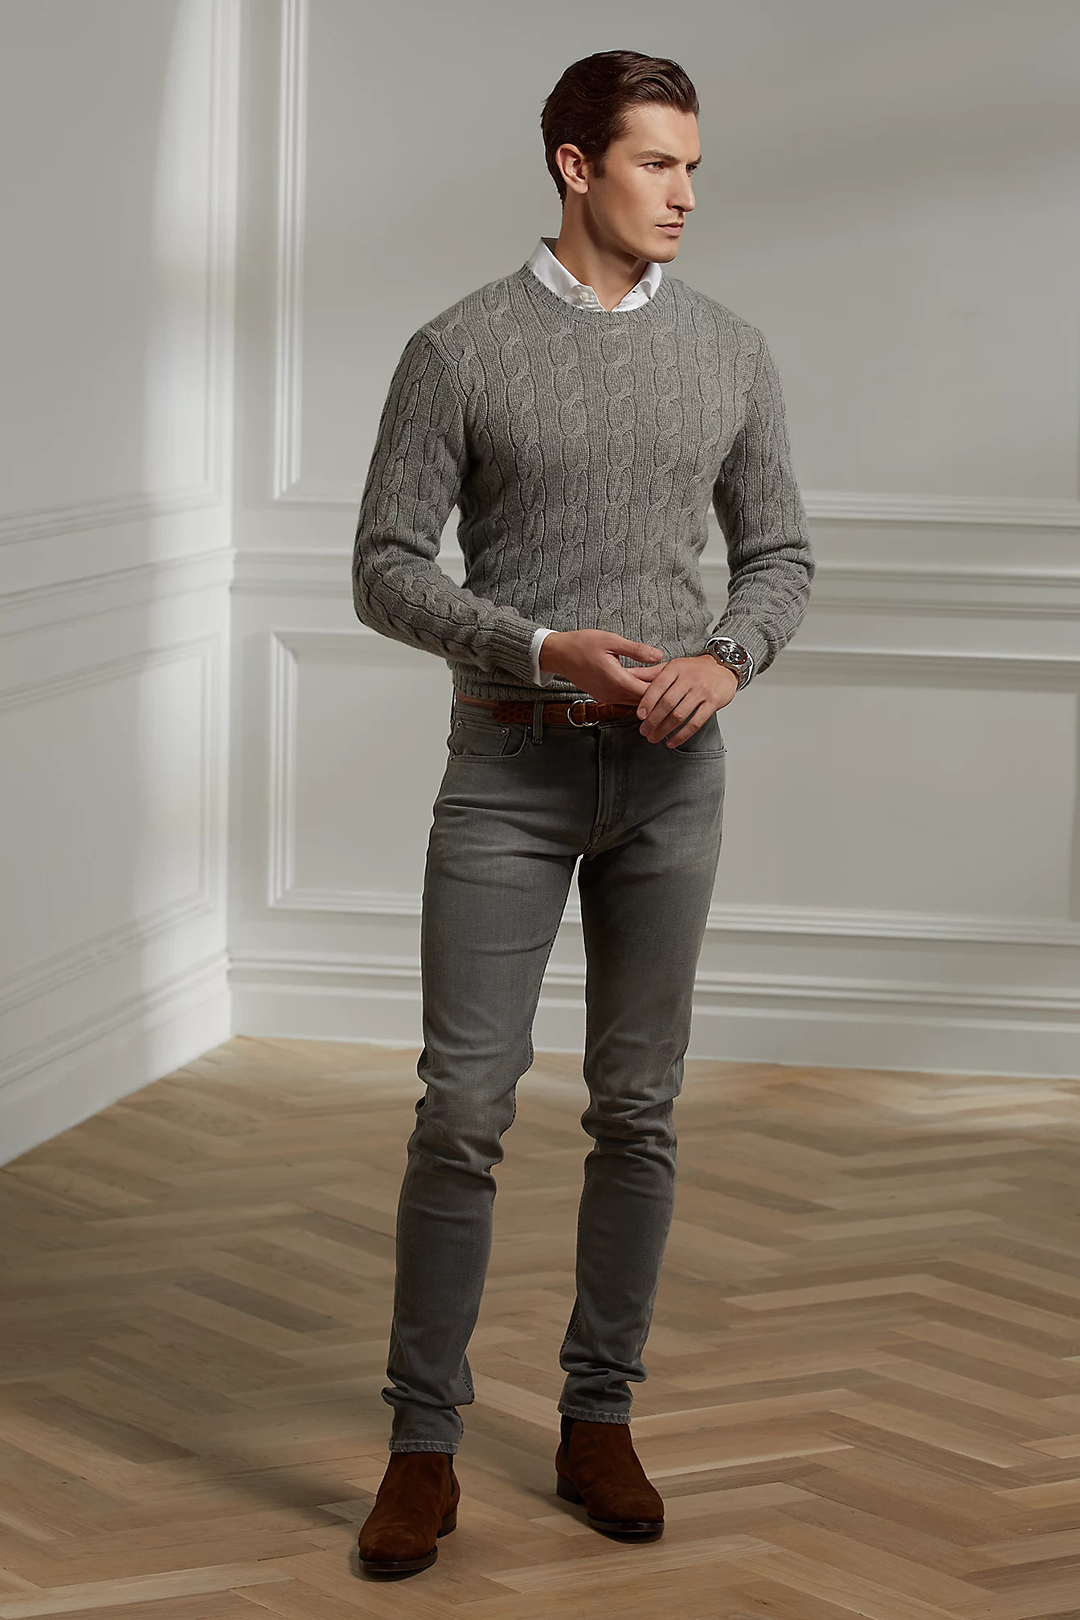 Gray cable knit sweater over white dress shirt, gray jeans, and brown suede Chelsea boots outfit